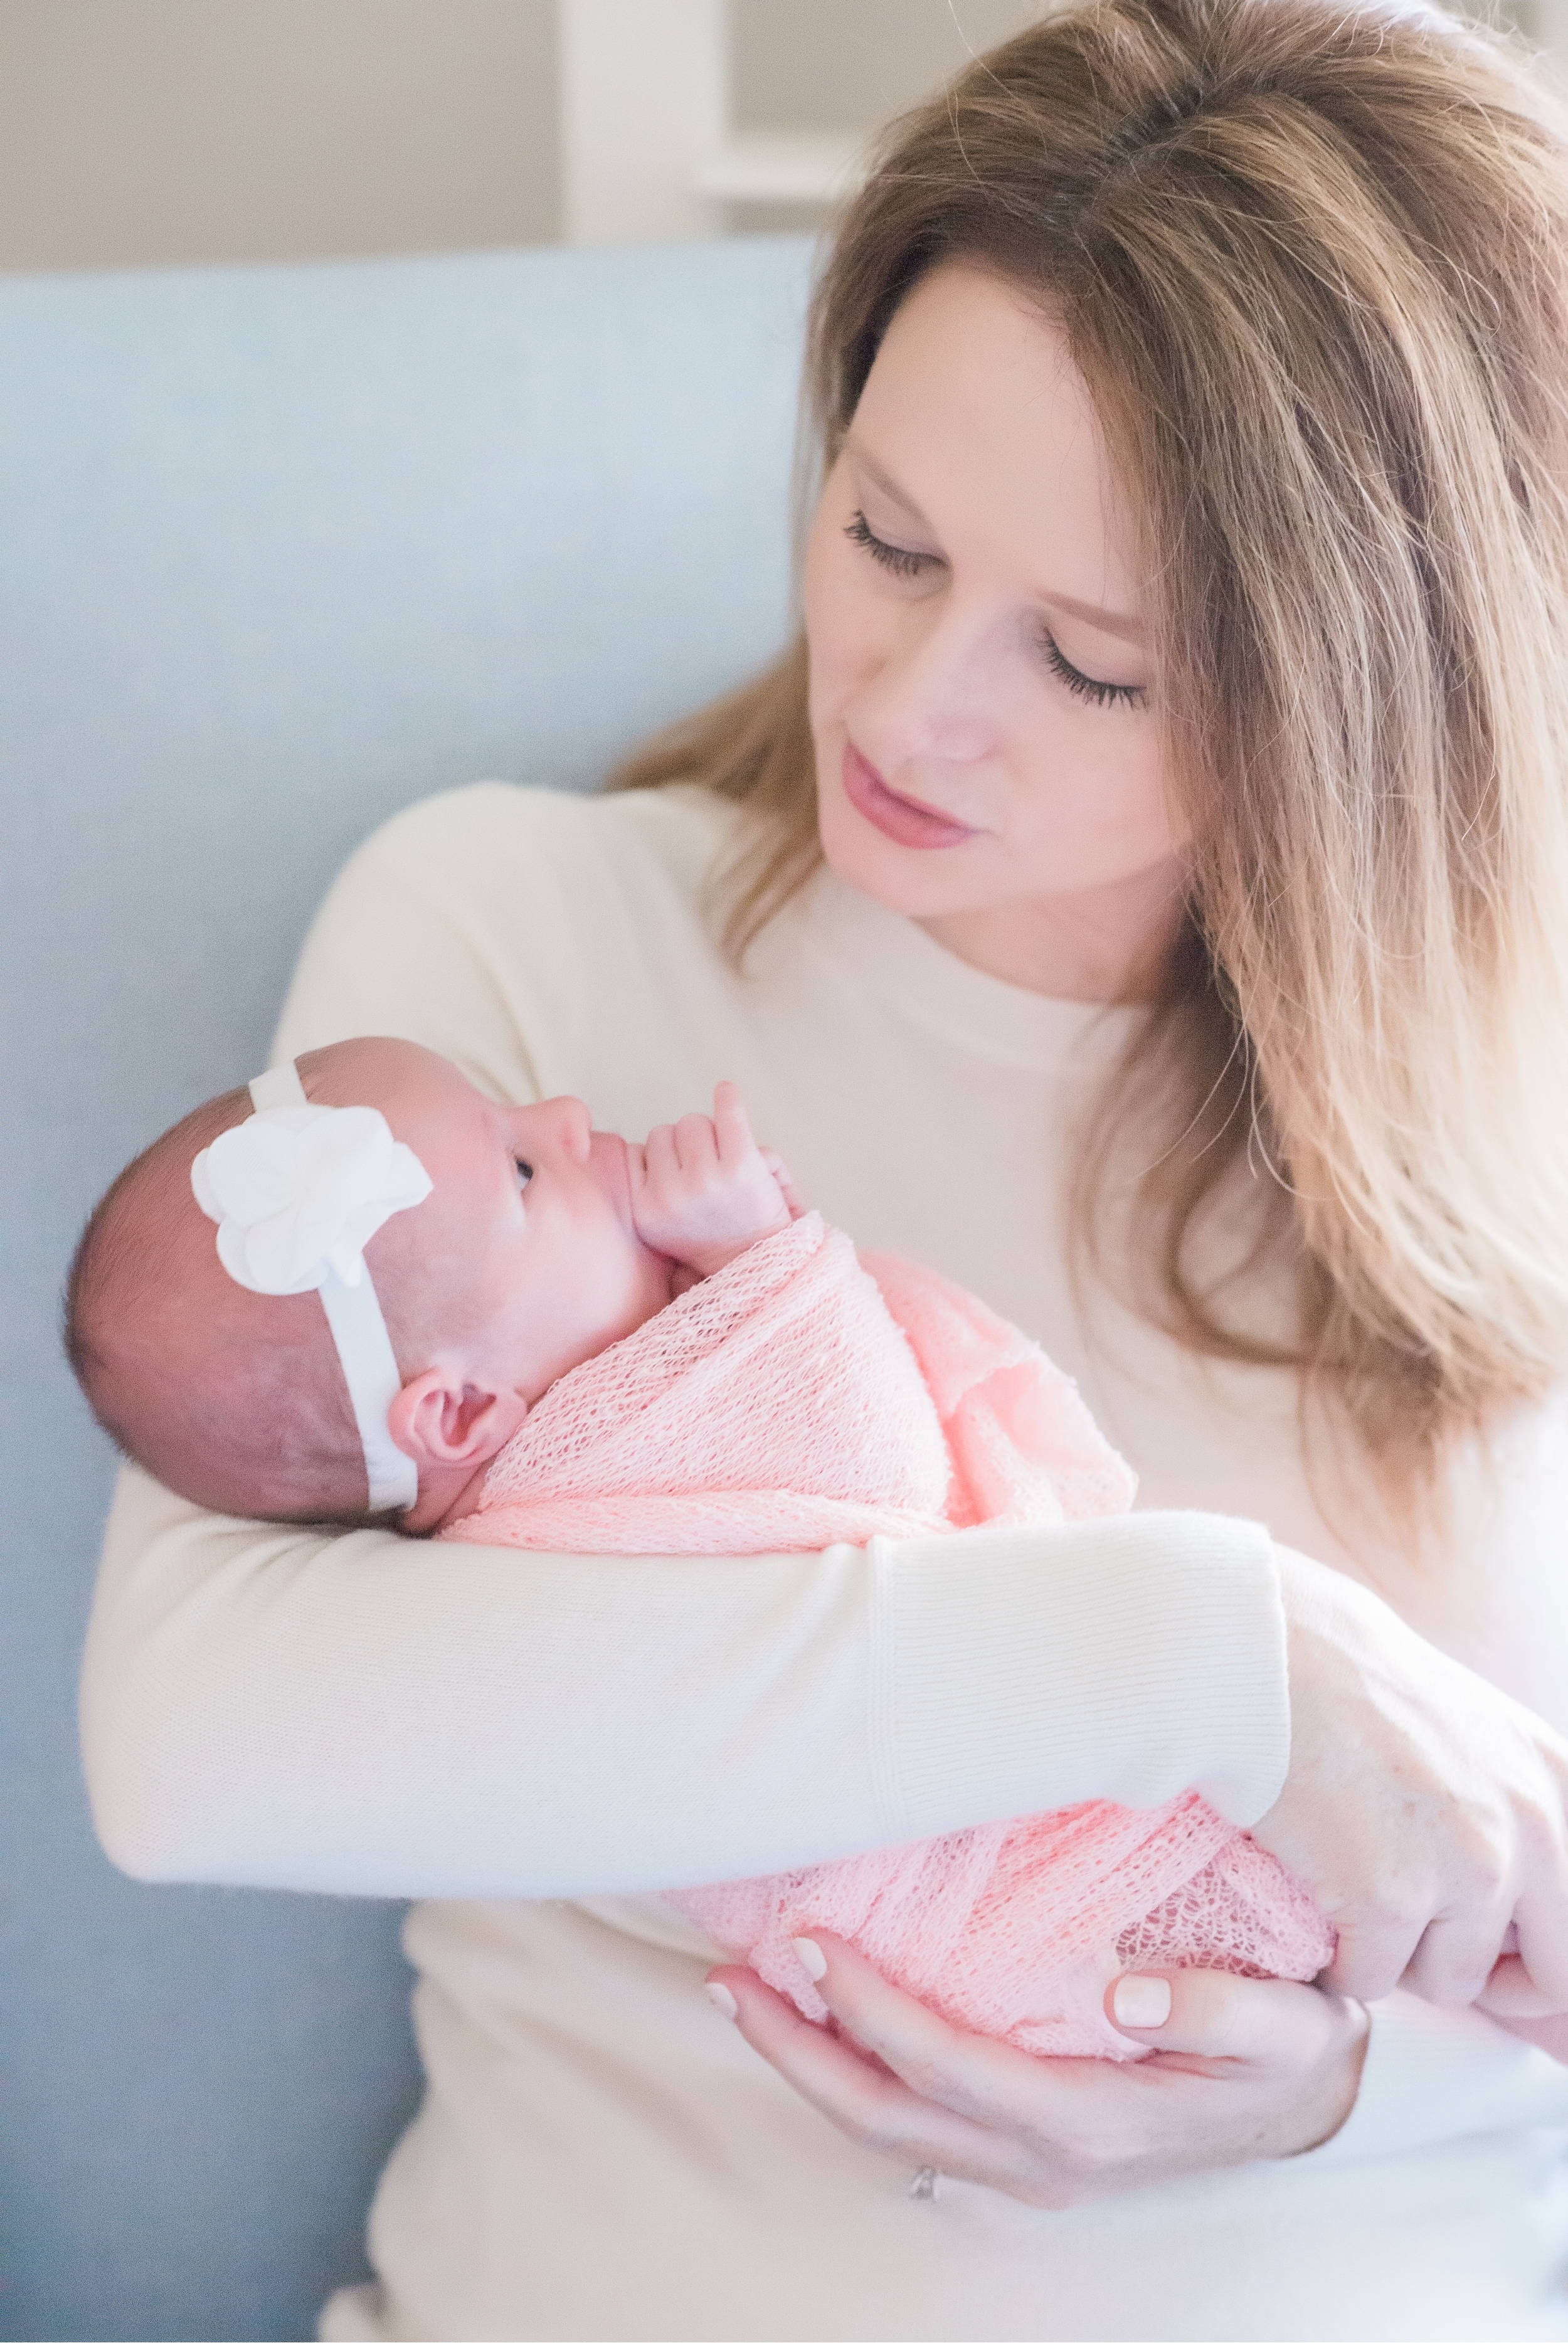 Lifestyle Newborn Photography | Houston Lifestyle Photography | Best Houston Newborn Photographer | Houston Newborn Photos | How to deal with mom guilt